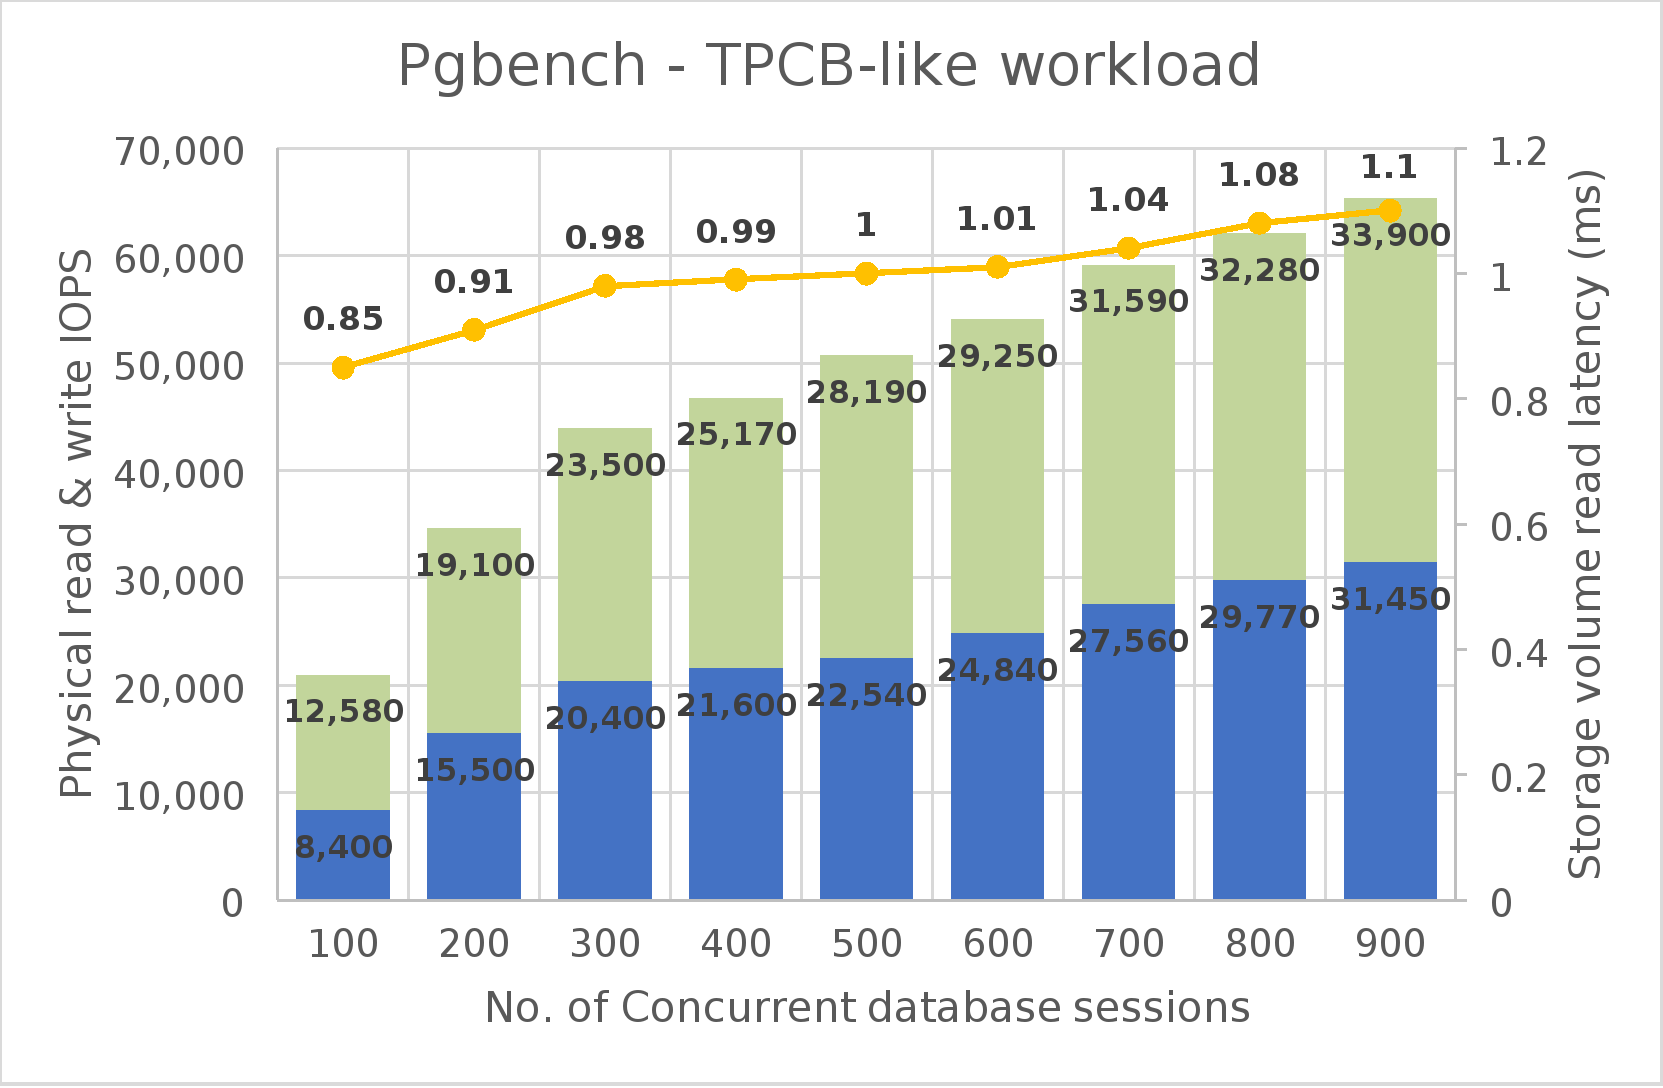 This figure shows the physical read and write IOPS increase with the number of concurrent database sessions for a TPCB-like workload.